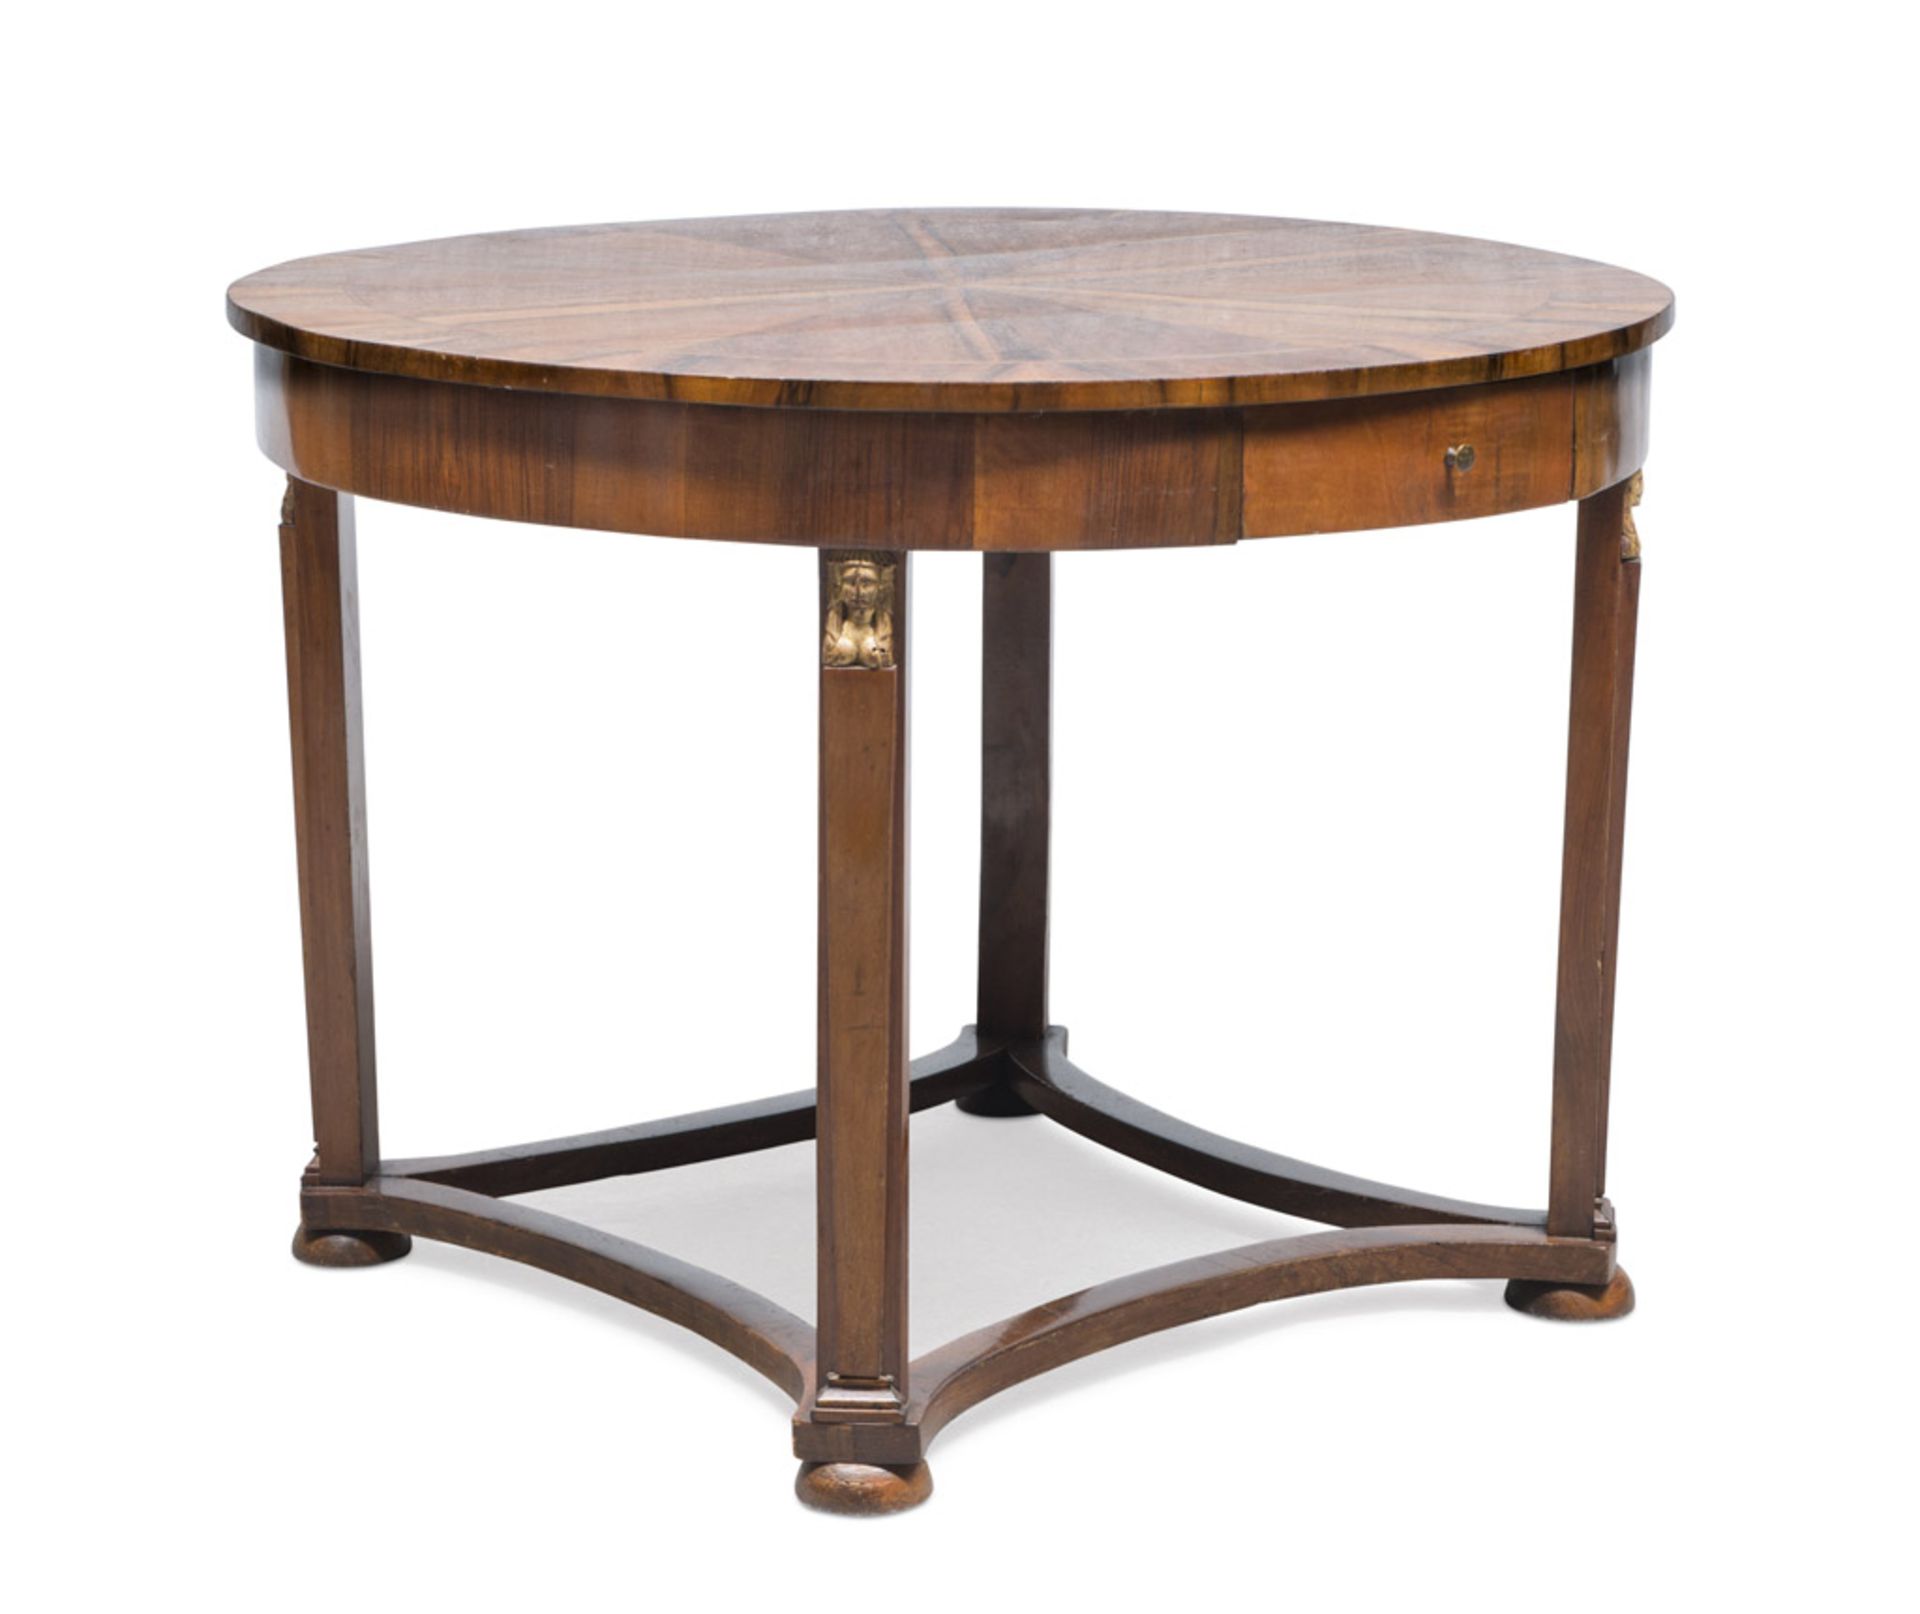 BEAUTIFUL ROUND TABLE IN WALNUT AND BRIAR WALNUT, TOSCAN EMPIRE PERIOD with two drawers in the